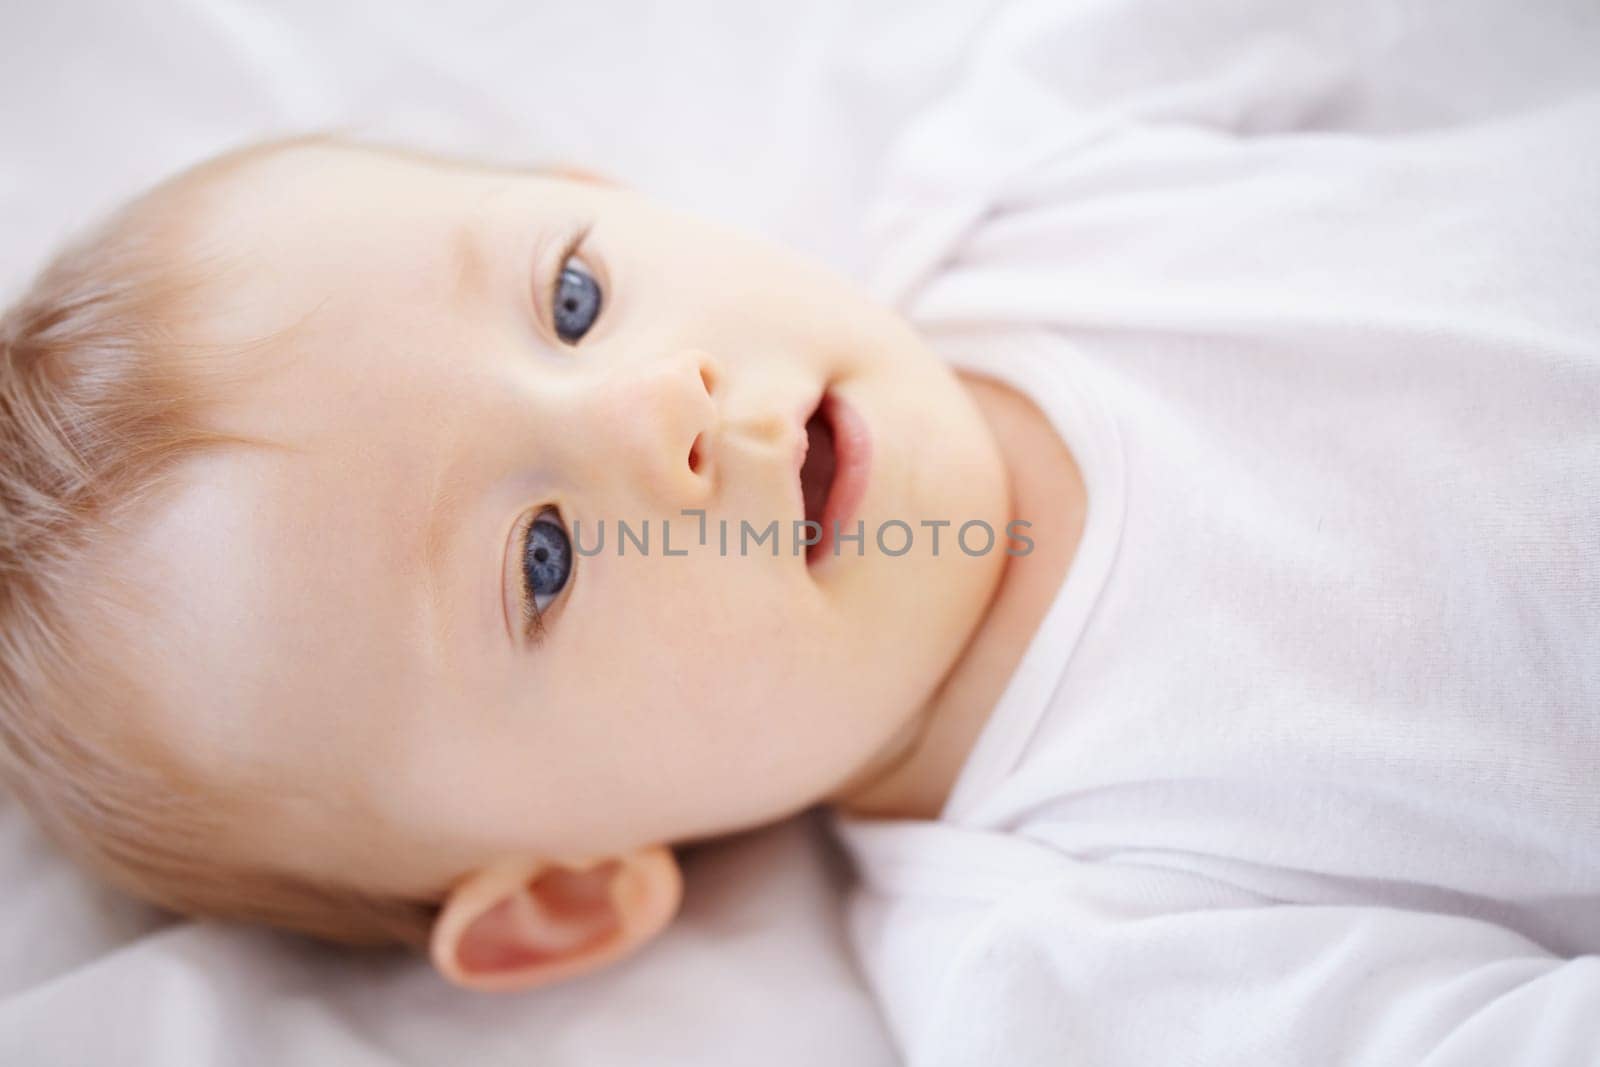 Home, bed and face of baby relax, resting and calm in nursery for sleeping or wake up in morning. Family, youth and closeup of infant newborn in bedroom for child development, growth and wellness.